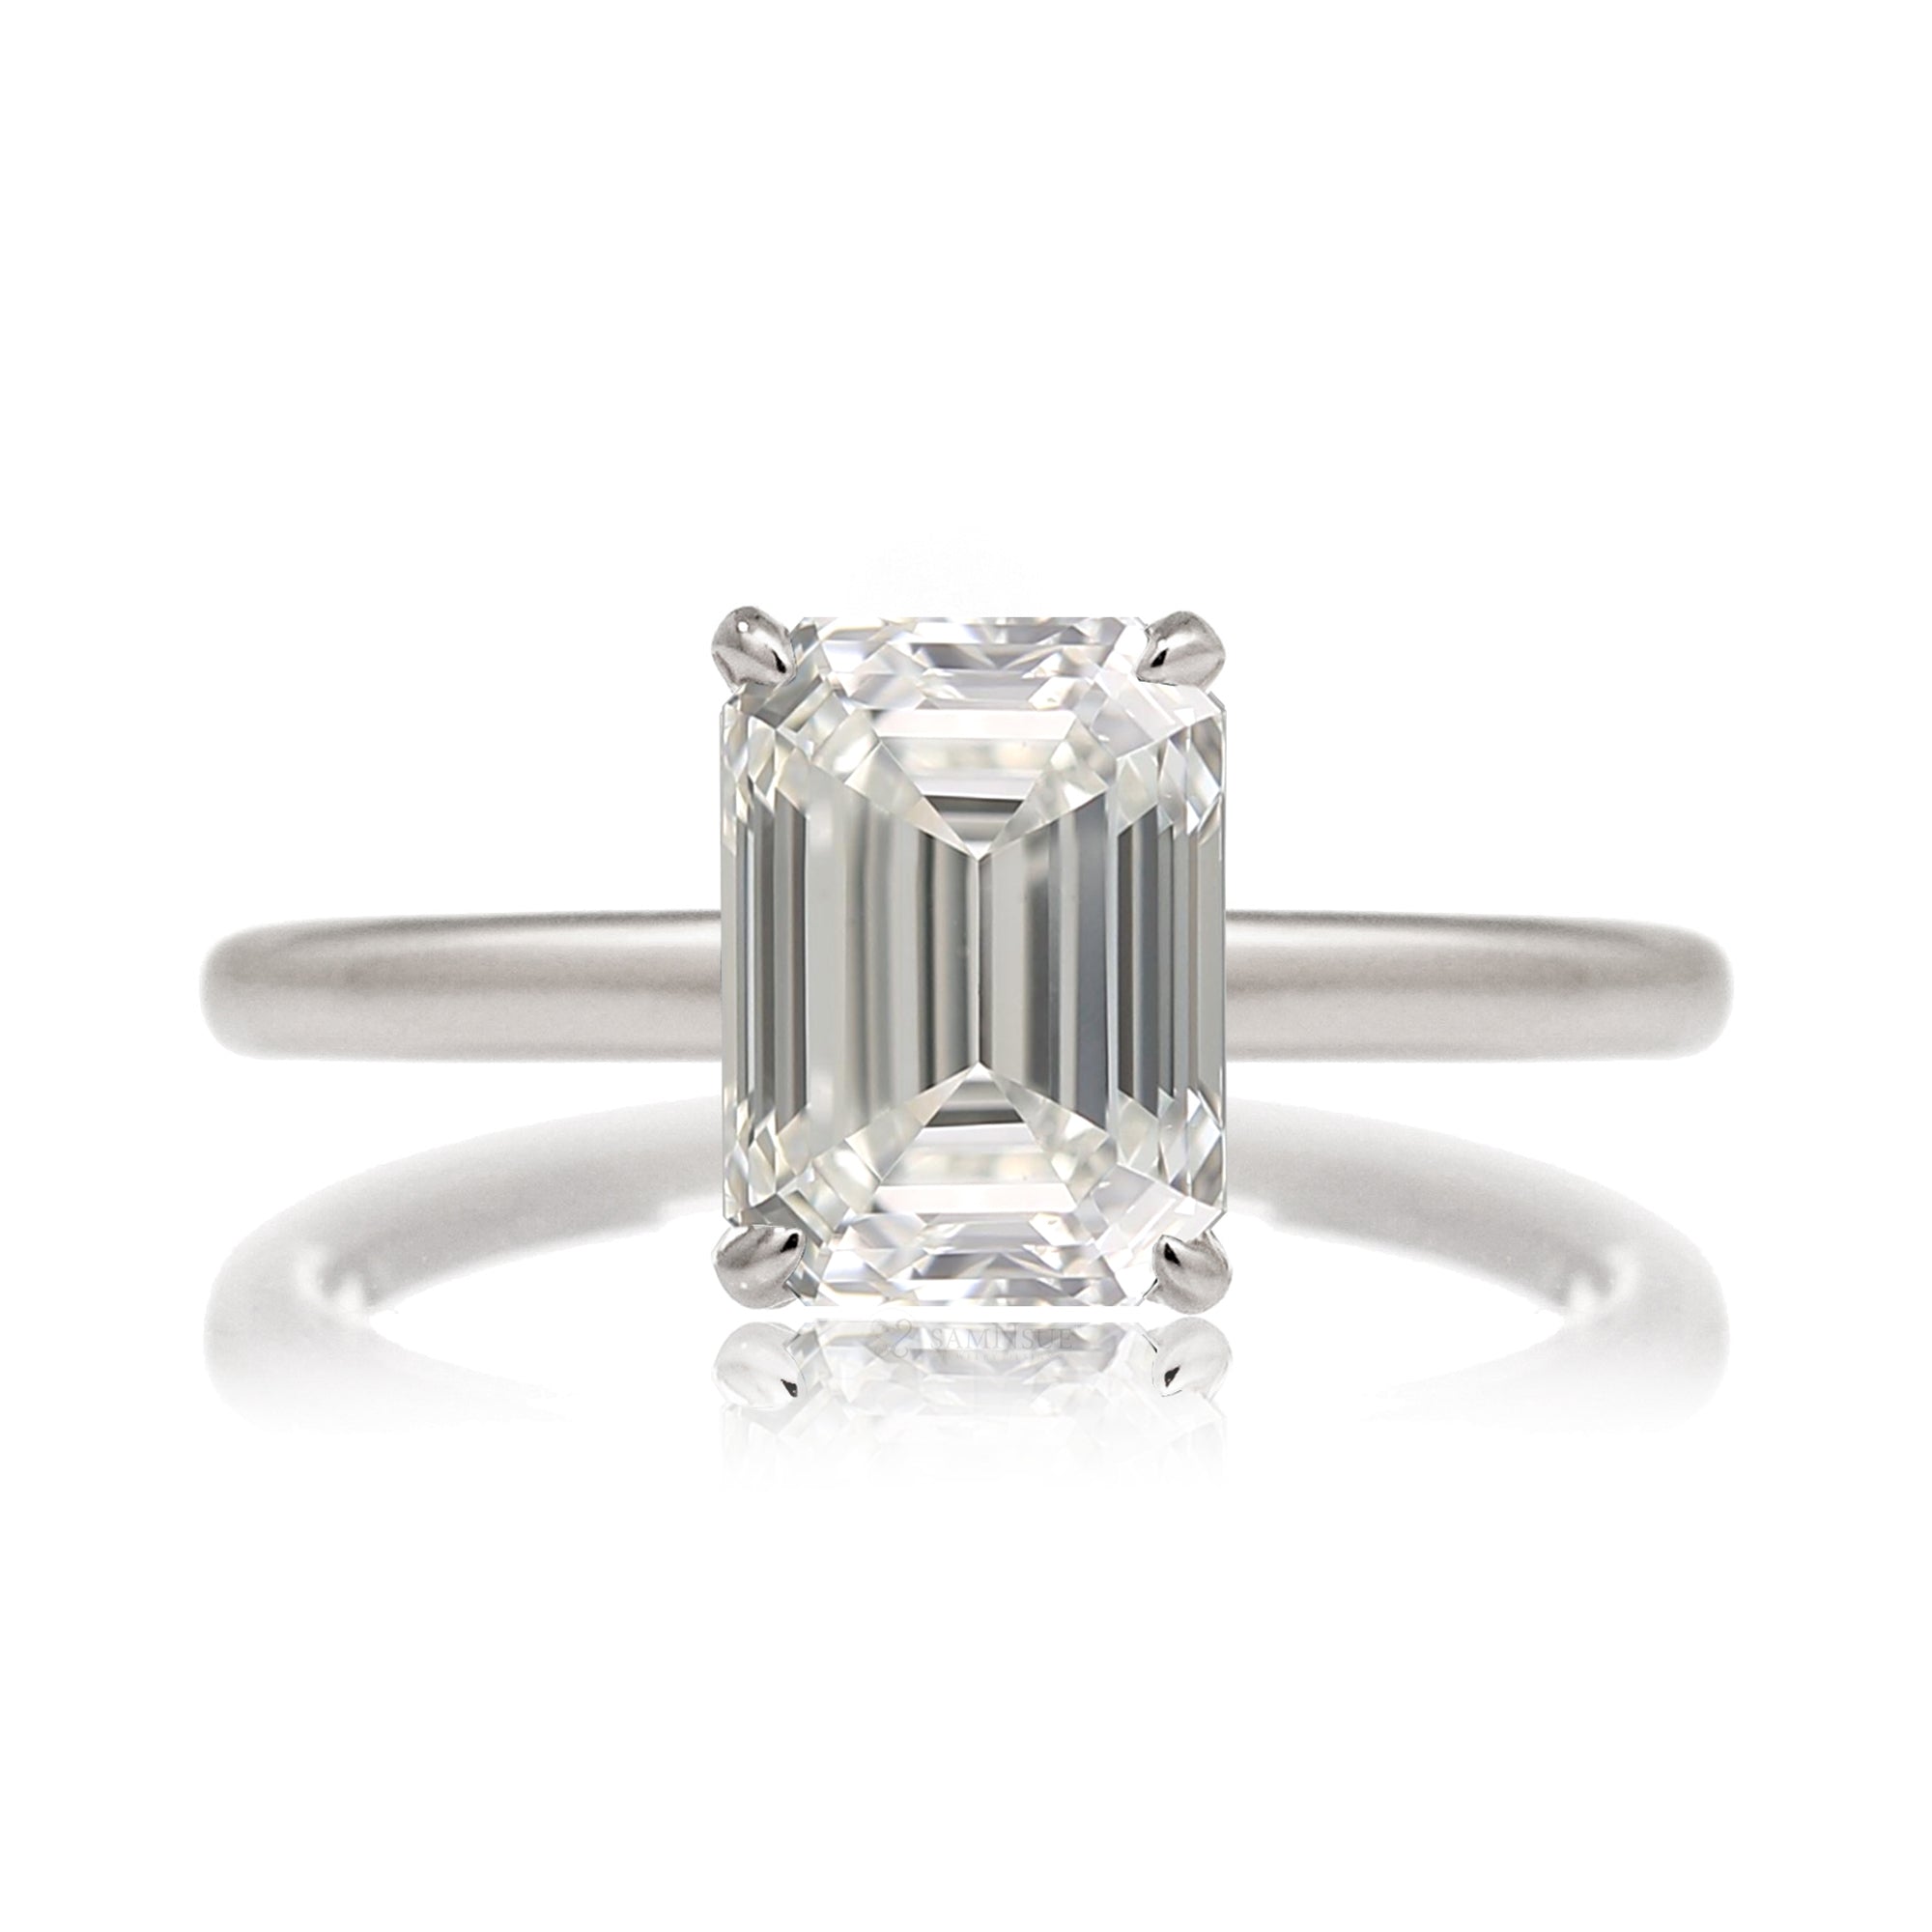 Emerald Step cut solitaire engagement ring diamond hidden halo solid band in white gold